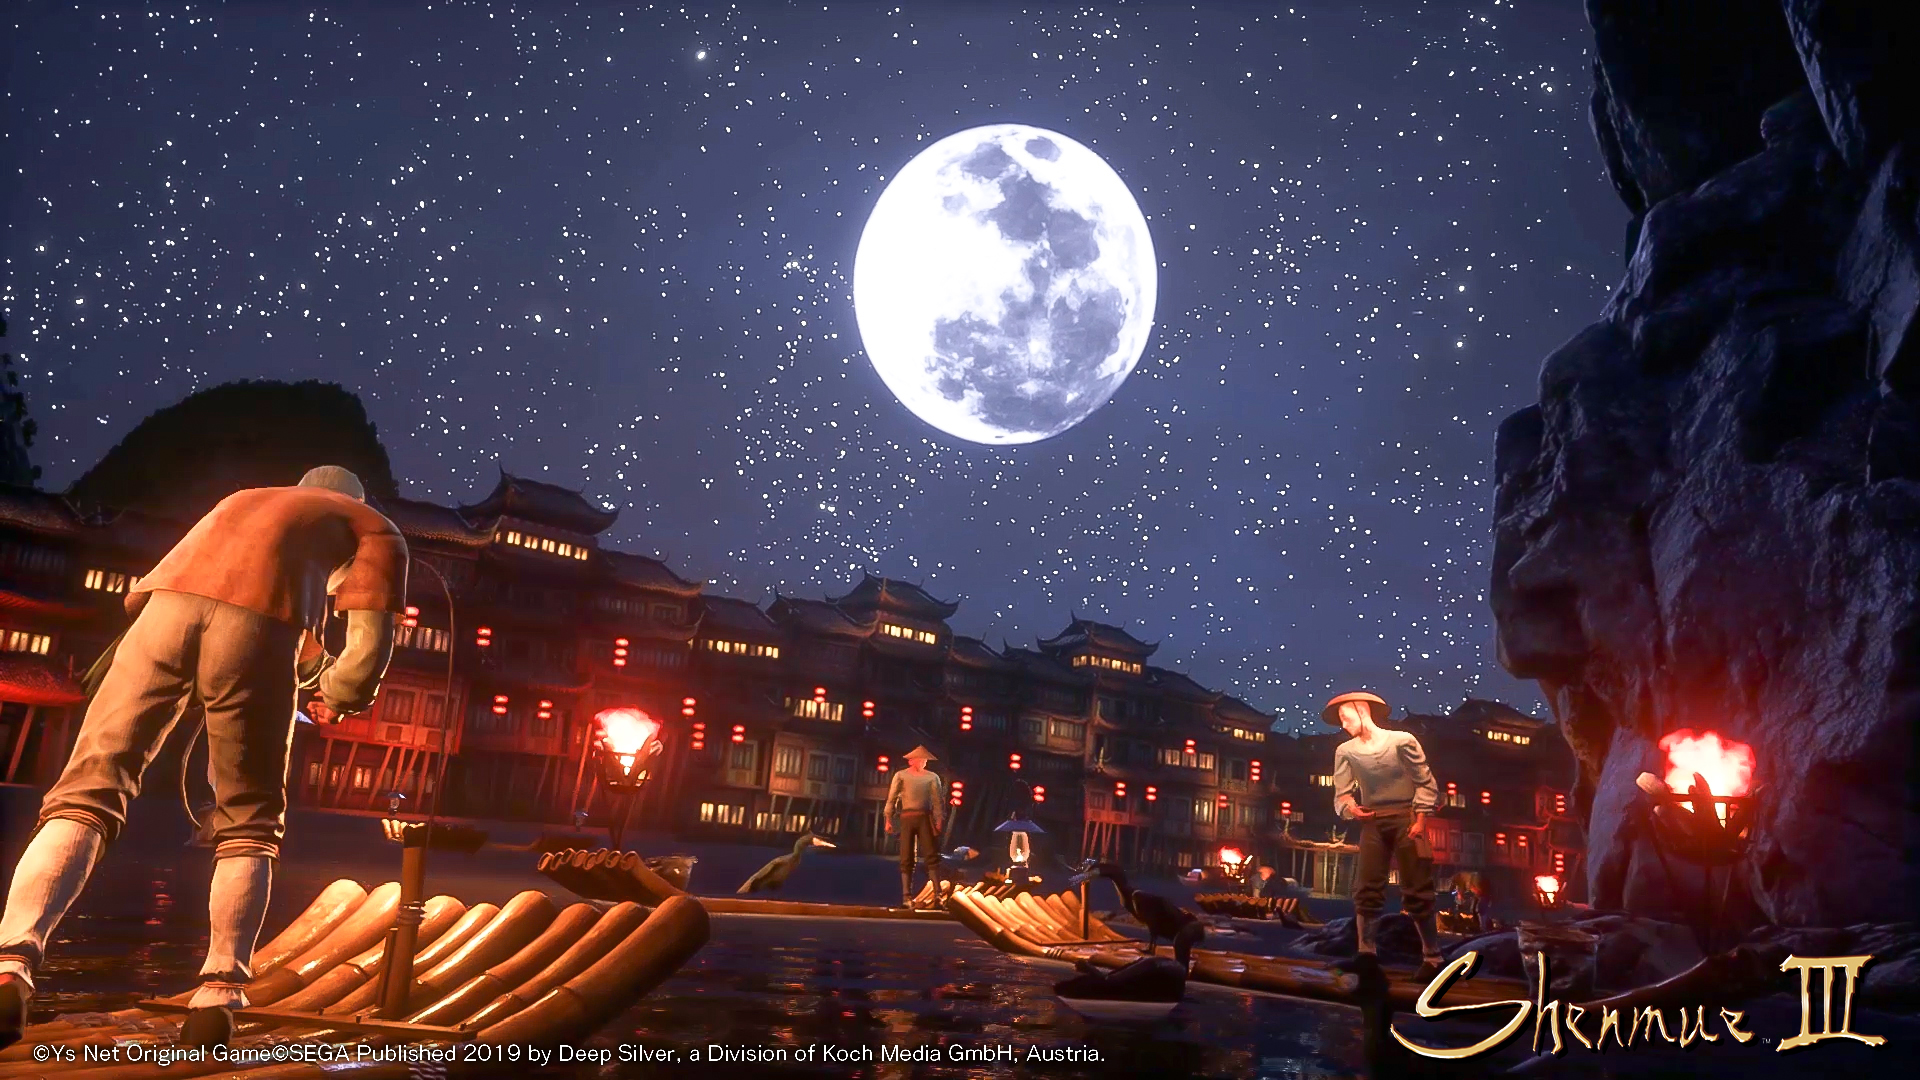 Shenmue III, Shenmue 3, release date, gameplay, trailer, PlayStation 4, game, update, new trailer, tokyo game show 2019, tgs2019